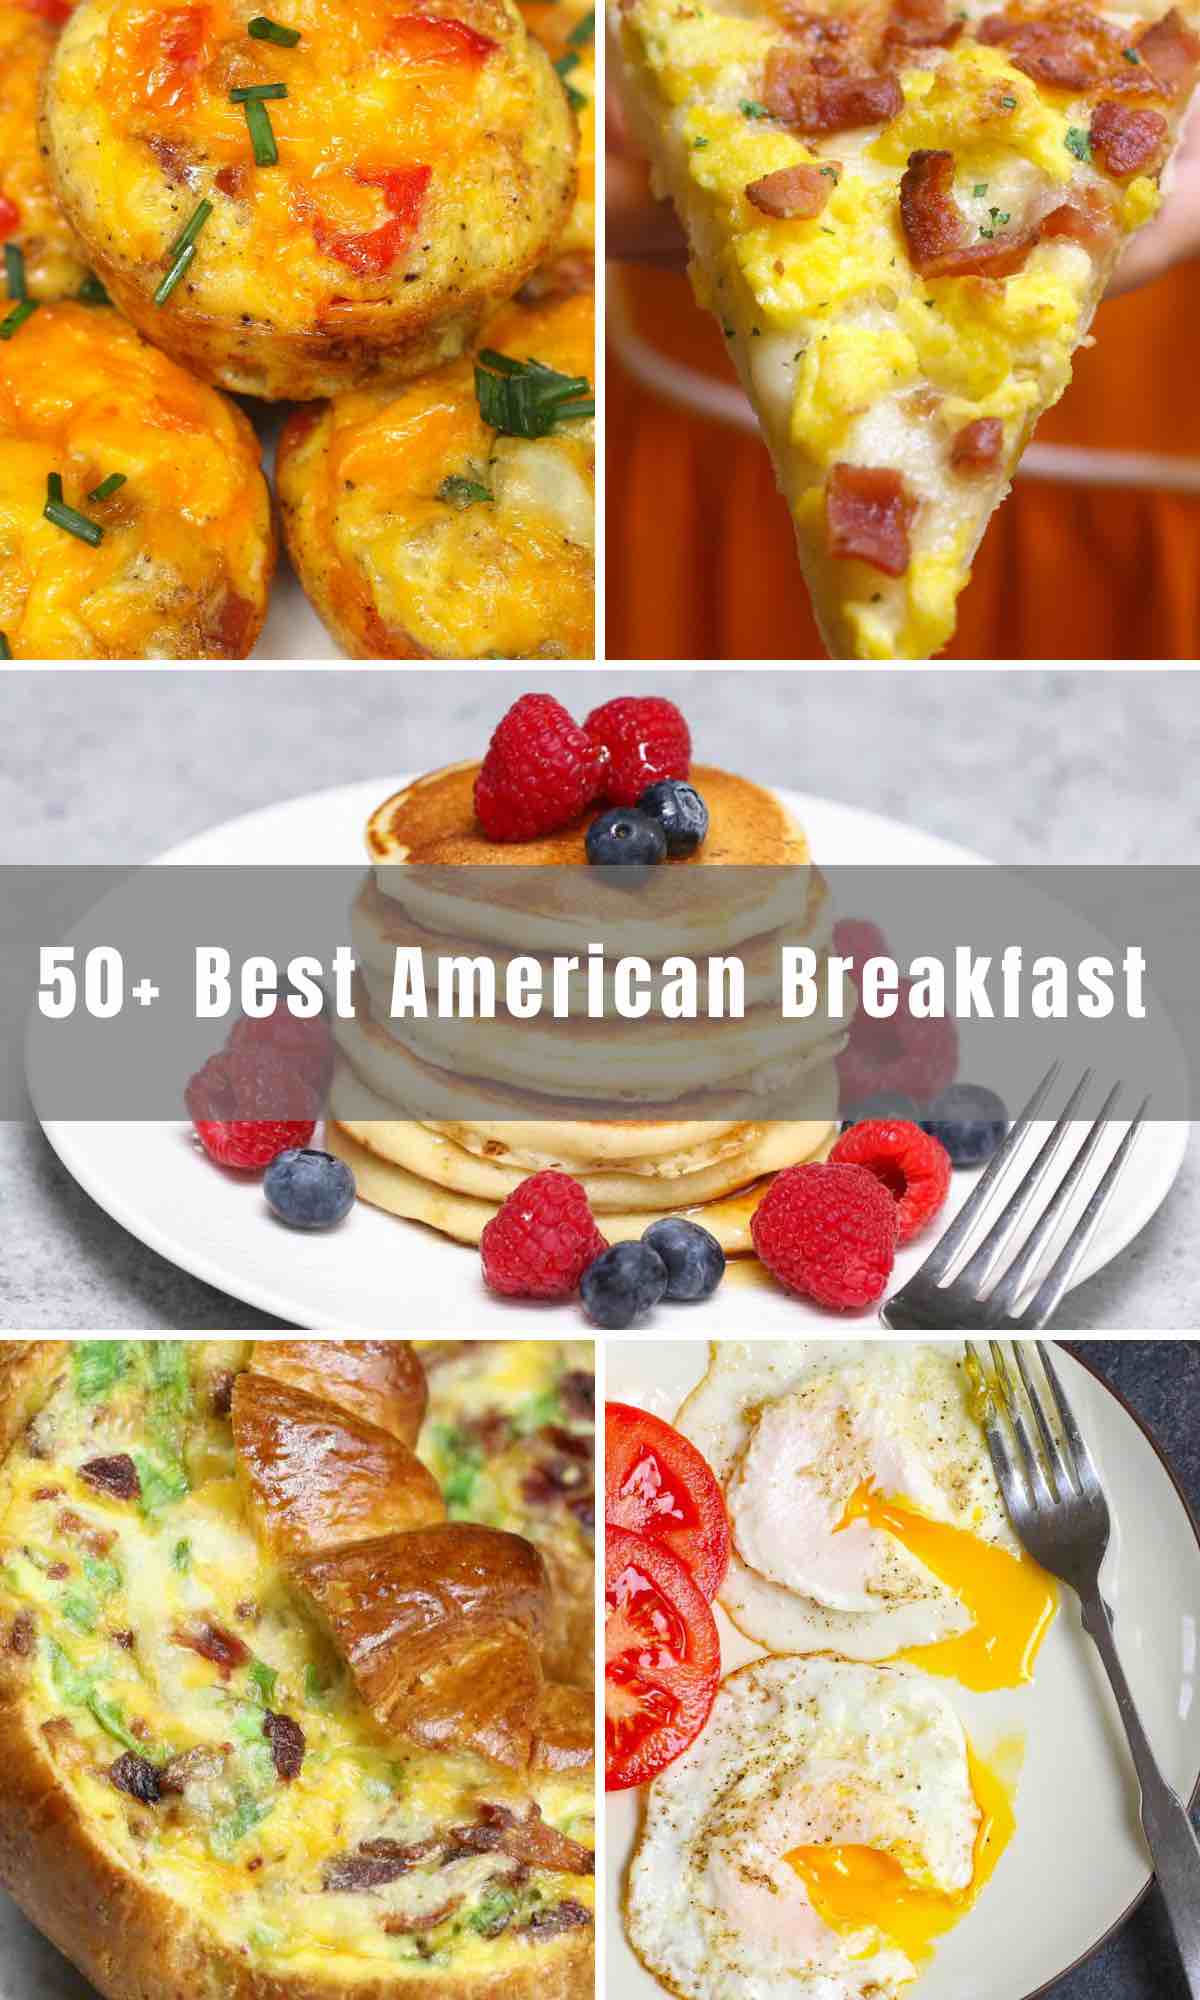 We've collected over 50 American Breakfast foods, recipes, and drinks that will have you wonder which one to try first! From traditional bread pudding to overnight breakfast oats and everything in between, there are many options that you and your family love!